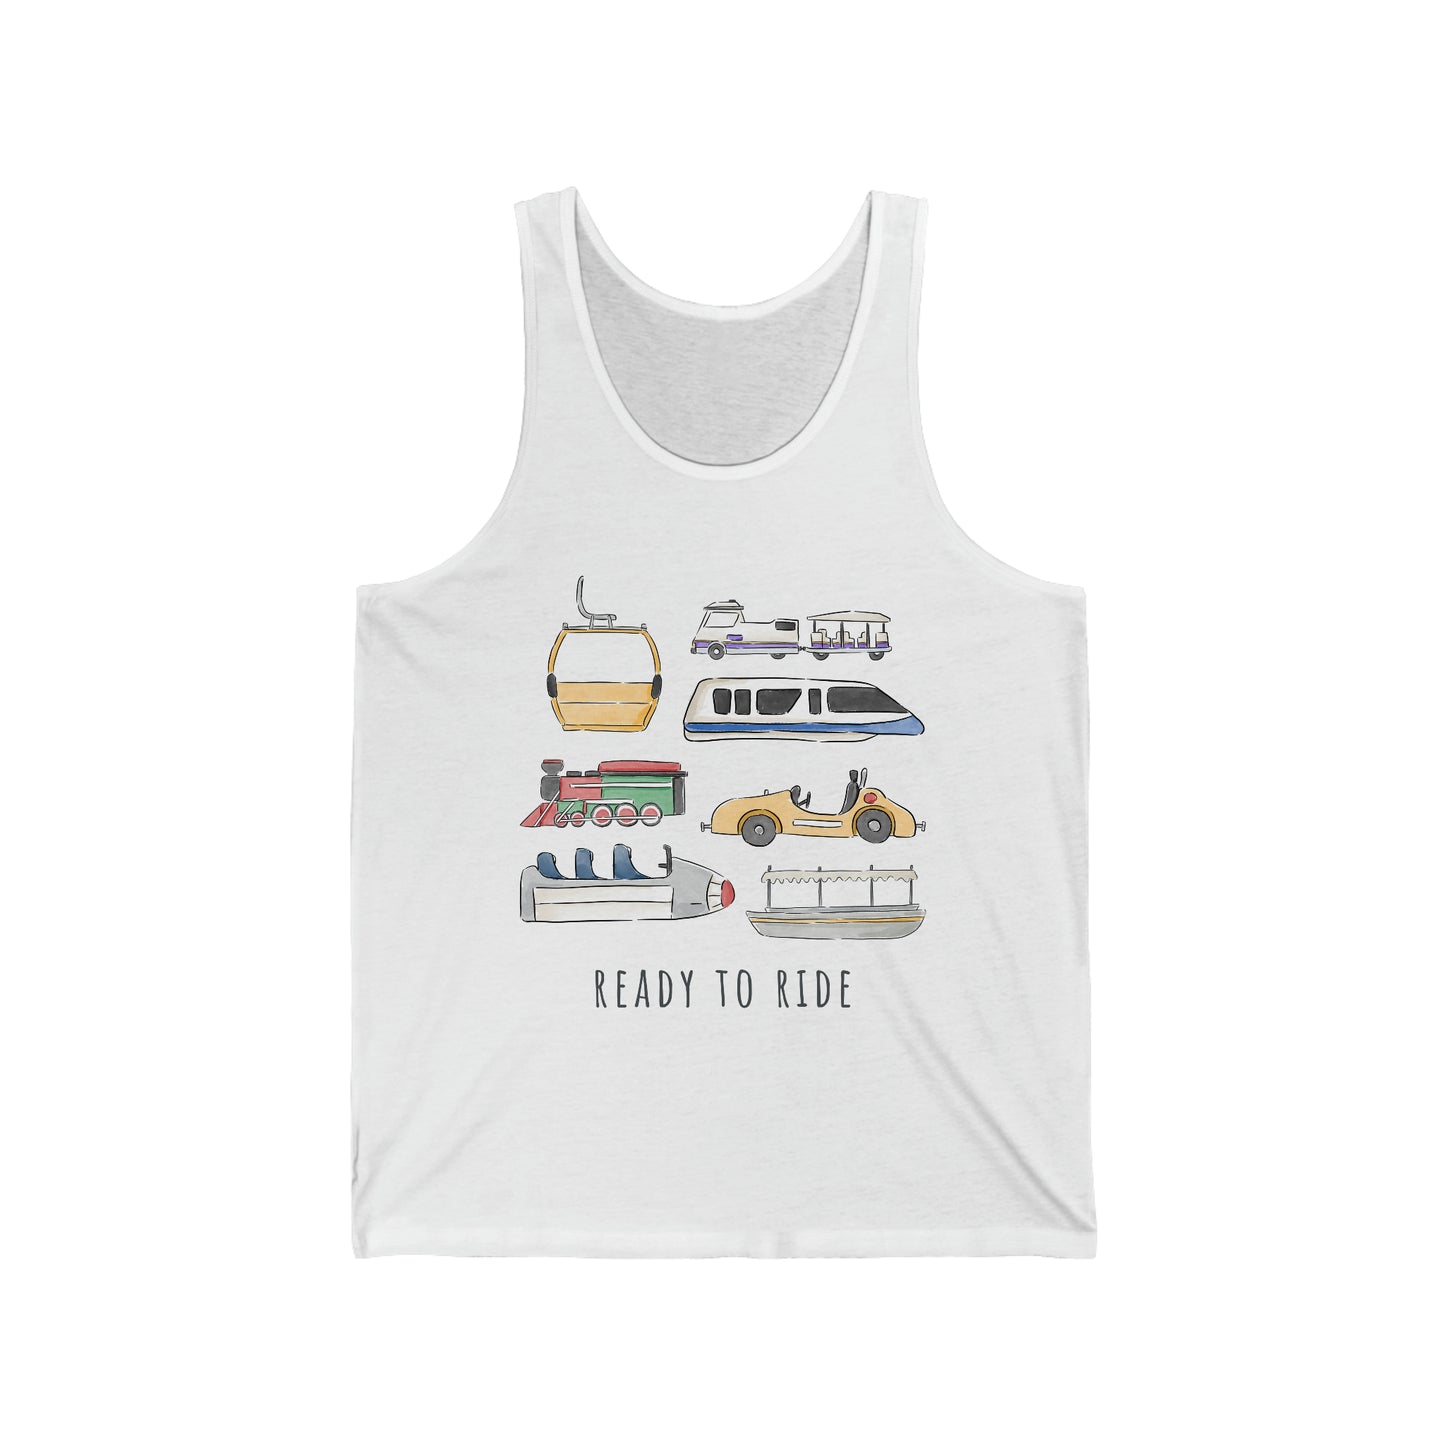 Ready To Ride Unisex Adult Tank Top